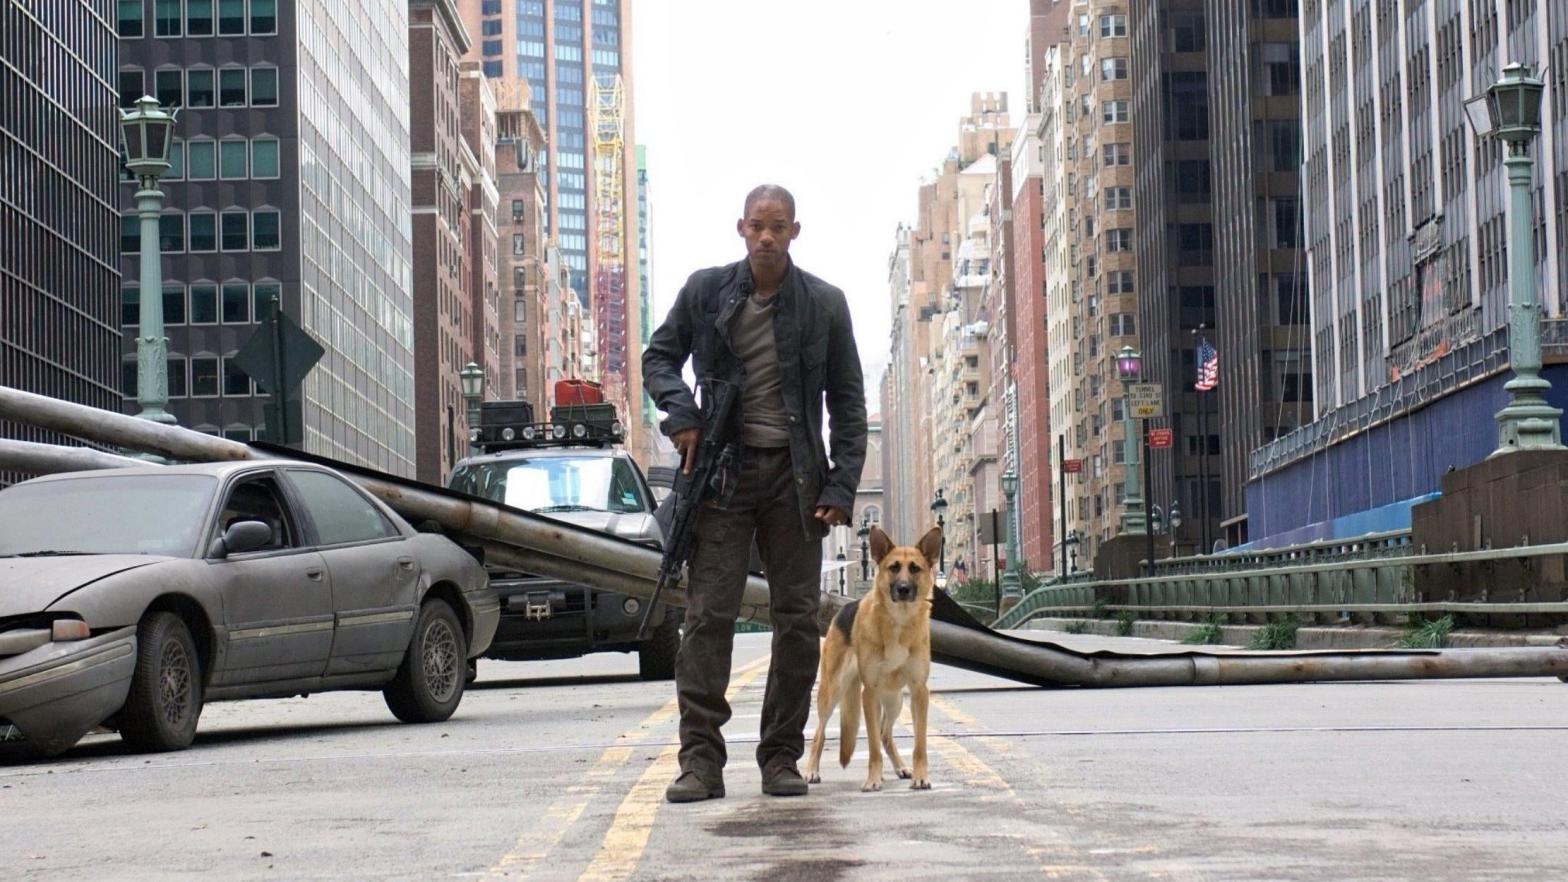 Will Smith will return for I Am Legend 2. (Image: Warner Bros.)